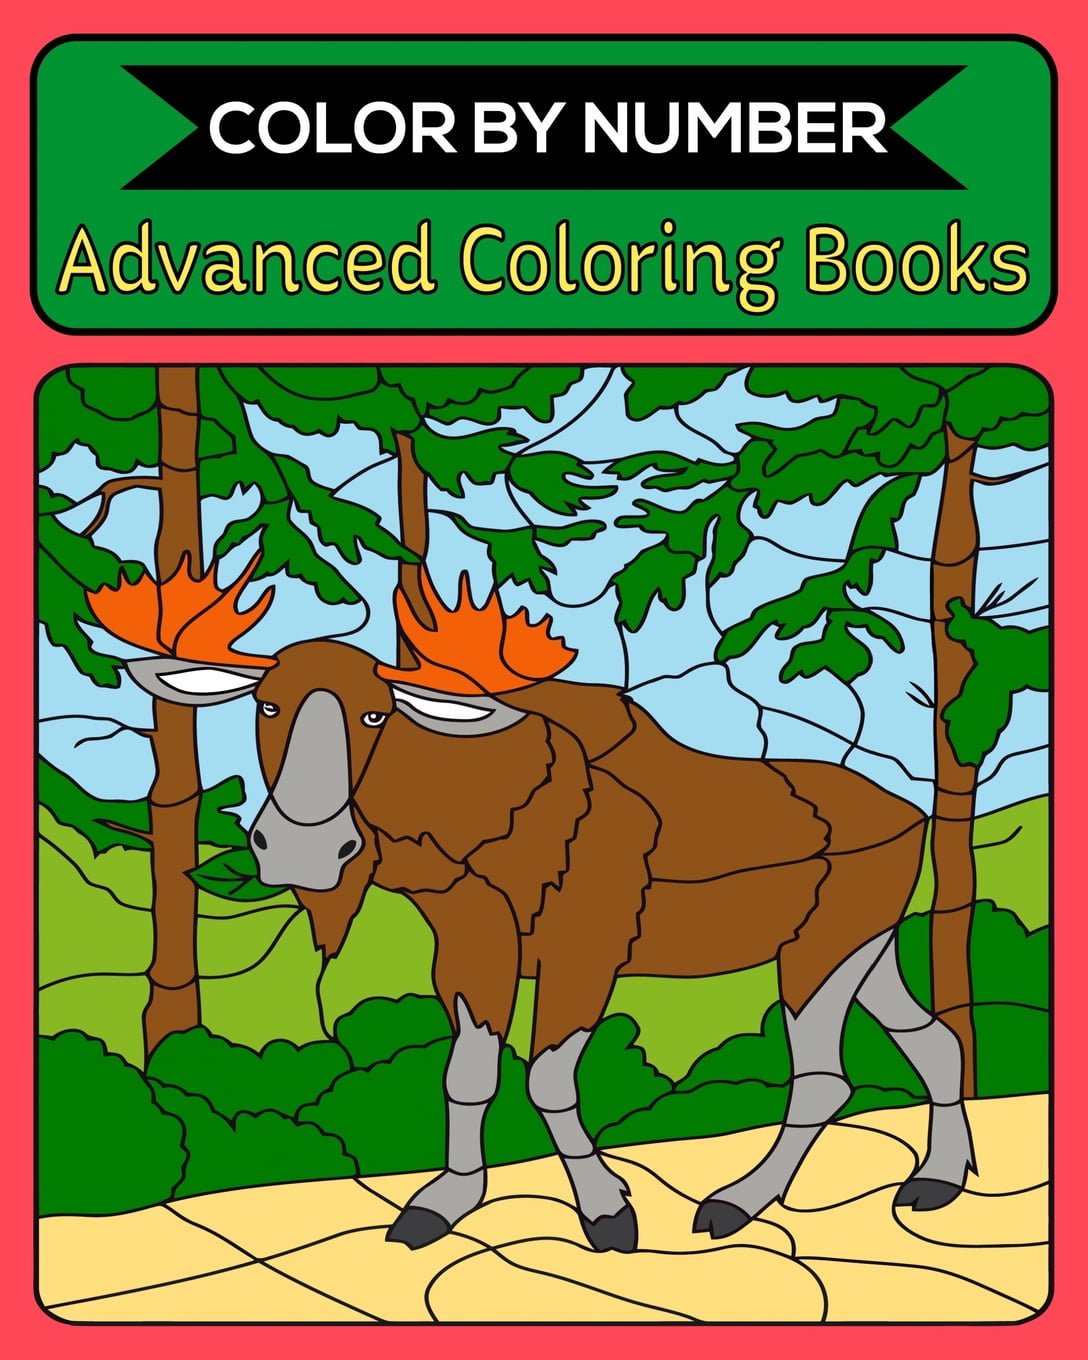 color-by-number-advanced-coloring-books-50-unique-color-by-number-design-for-drawing-and